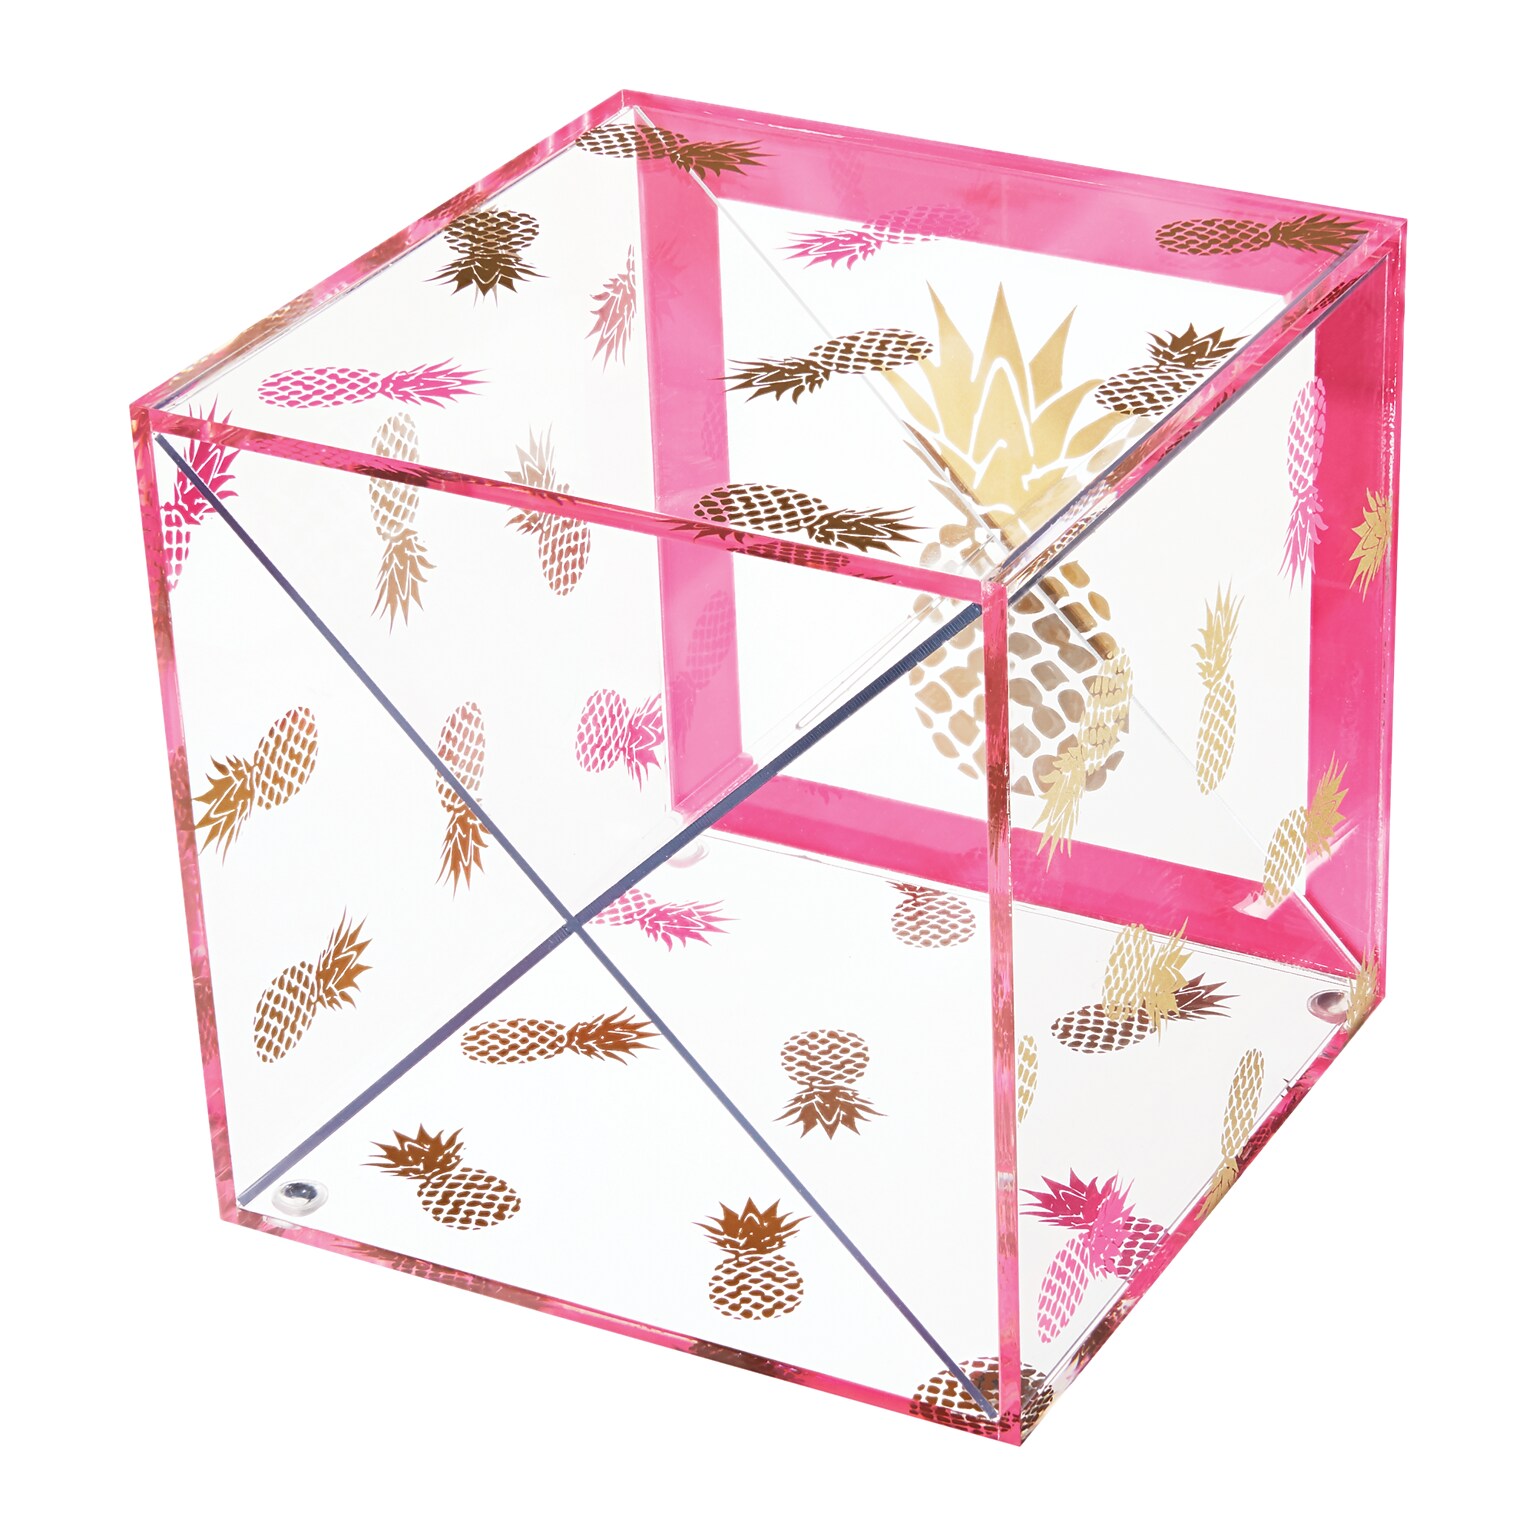 Deflecto® Desklarity™ Storage Cube with X Dividers, Precisely Pineapple, Pink/Metallic Gold, 6 x 6 x 6 (DEF-41696)